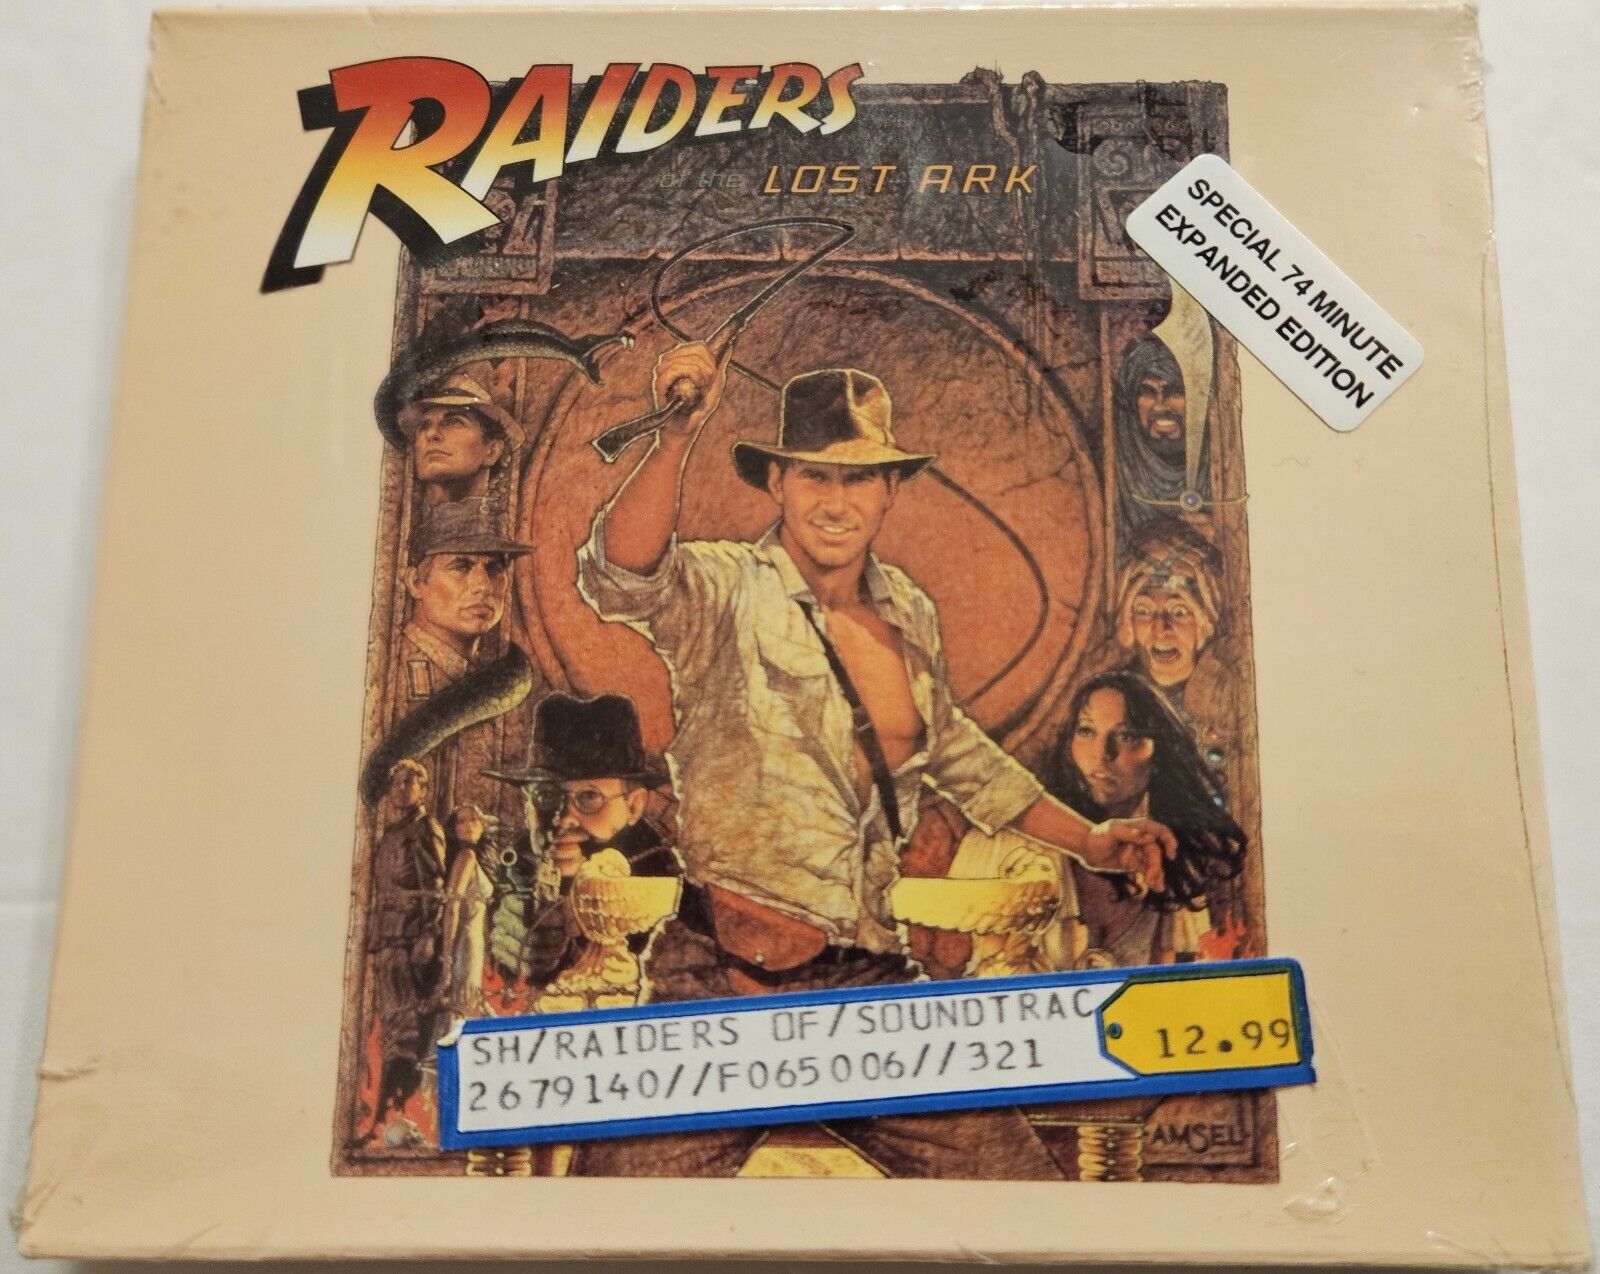 Raiders of the Lost Ark [Expanded Edition Soundtrack] by John Williams CD SEALED